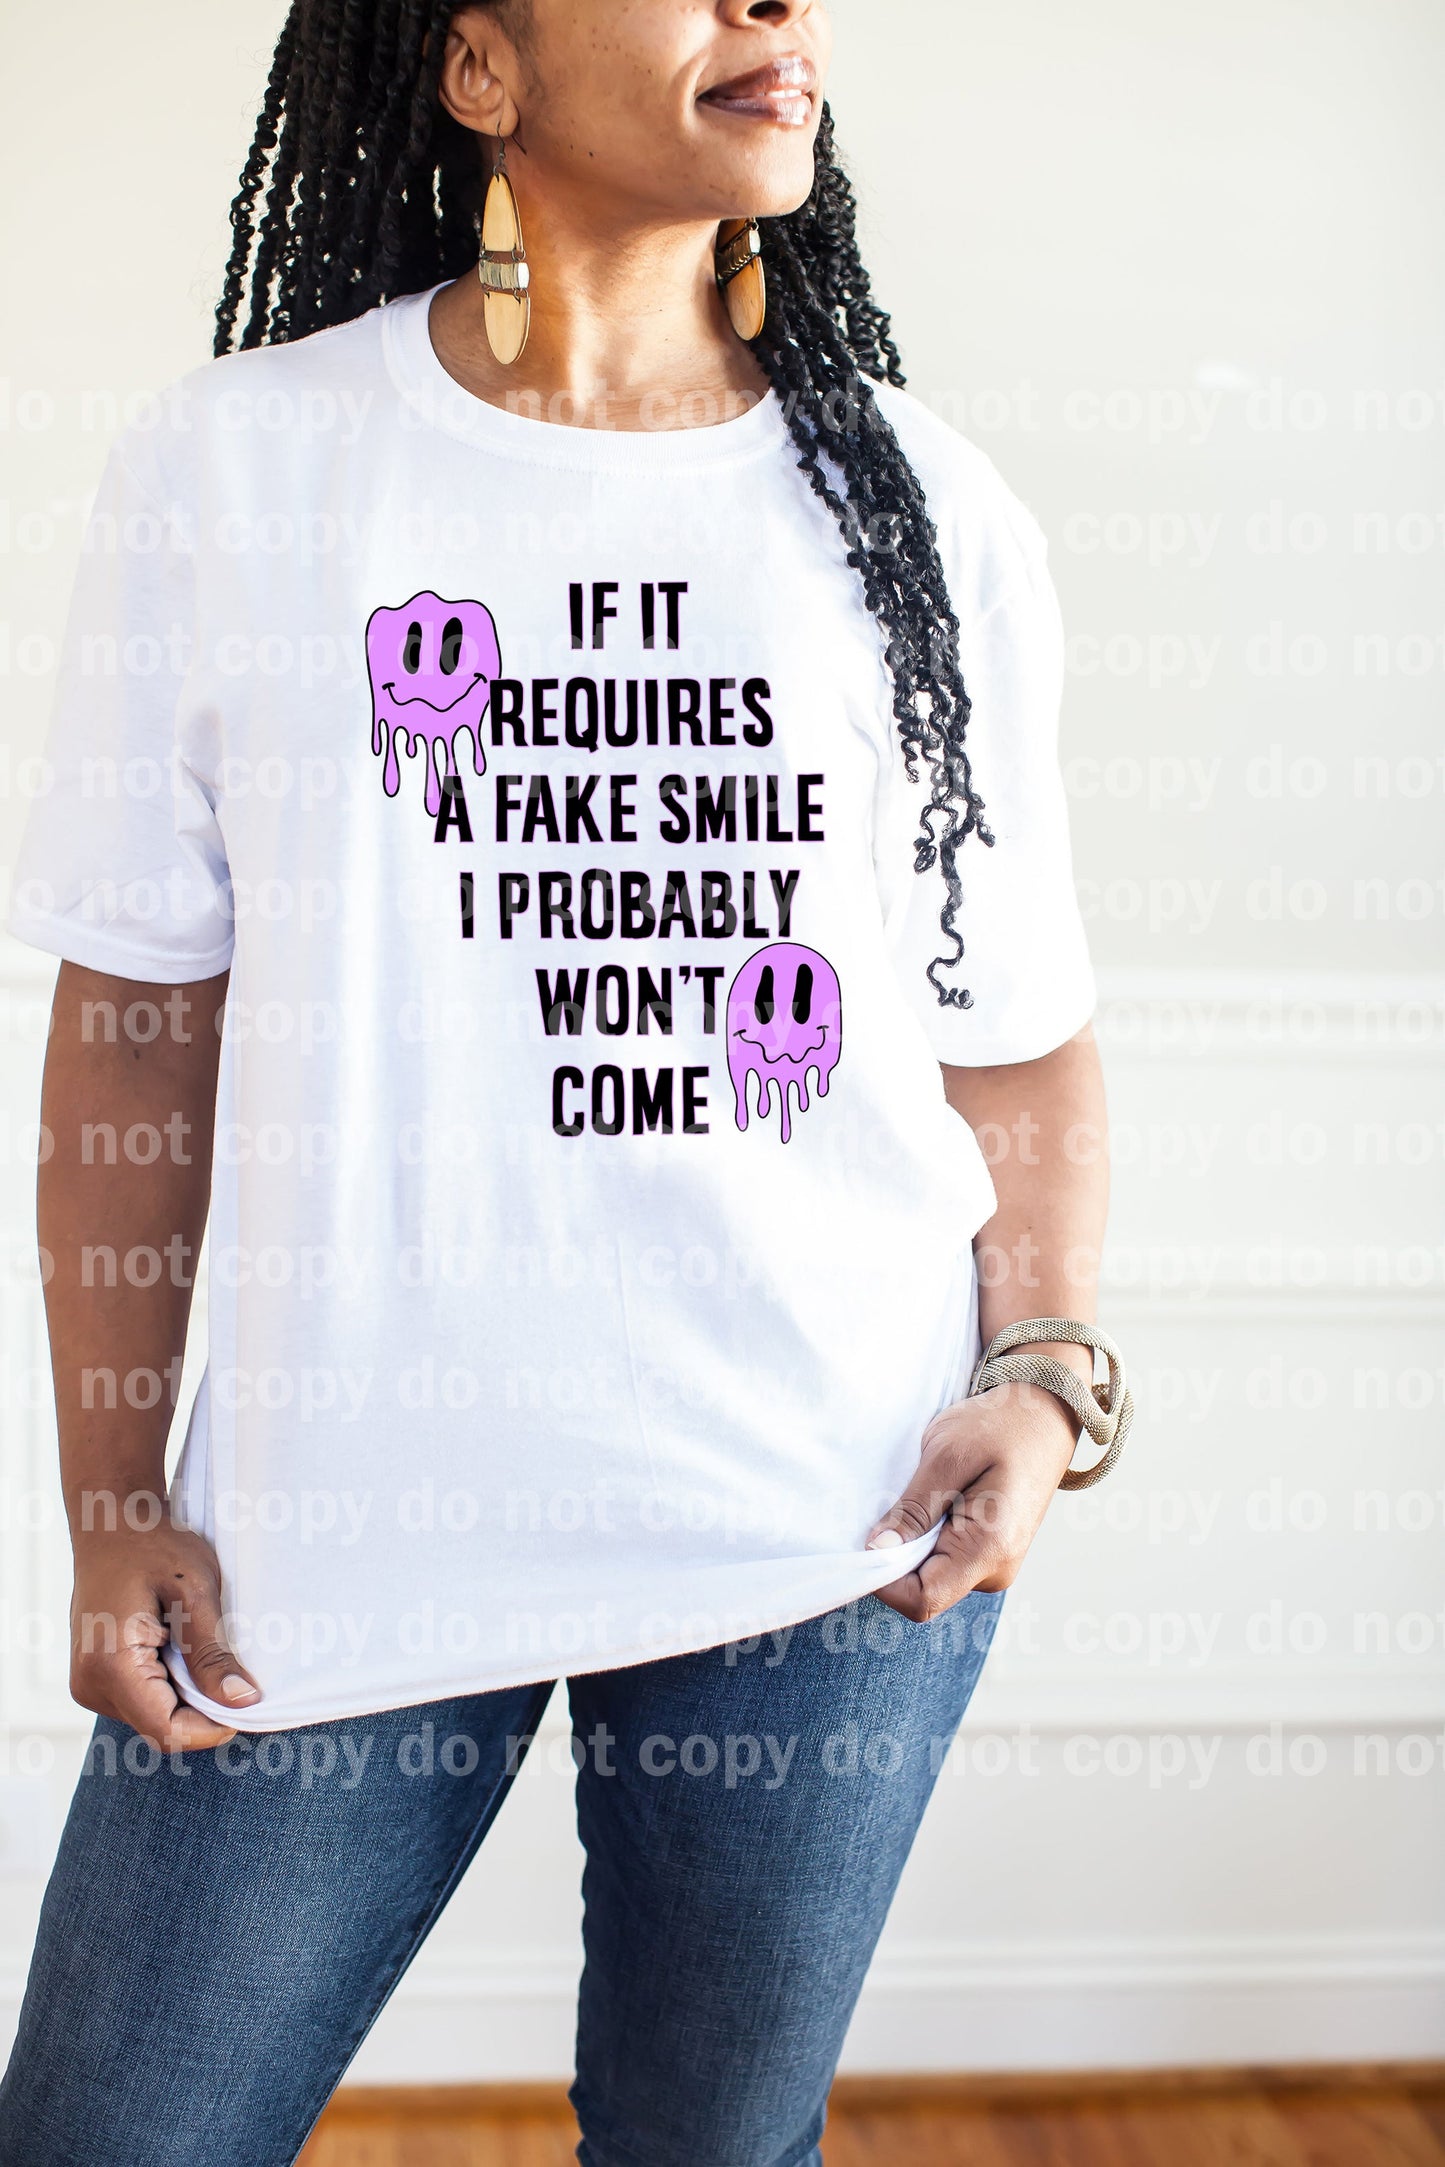 If It Requires A Fake Smile I Probably Won't Come Full Color/One Color Dream Print or Sublimation Print